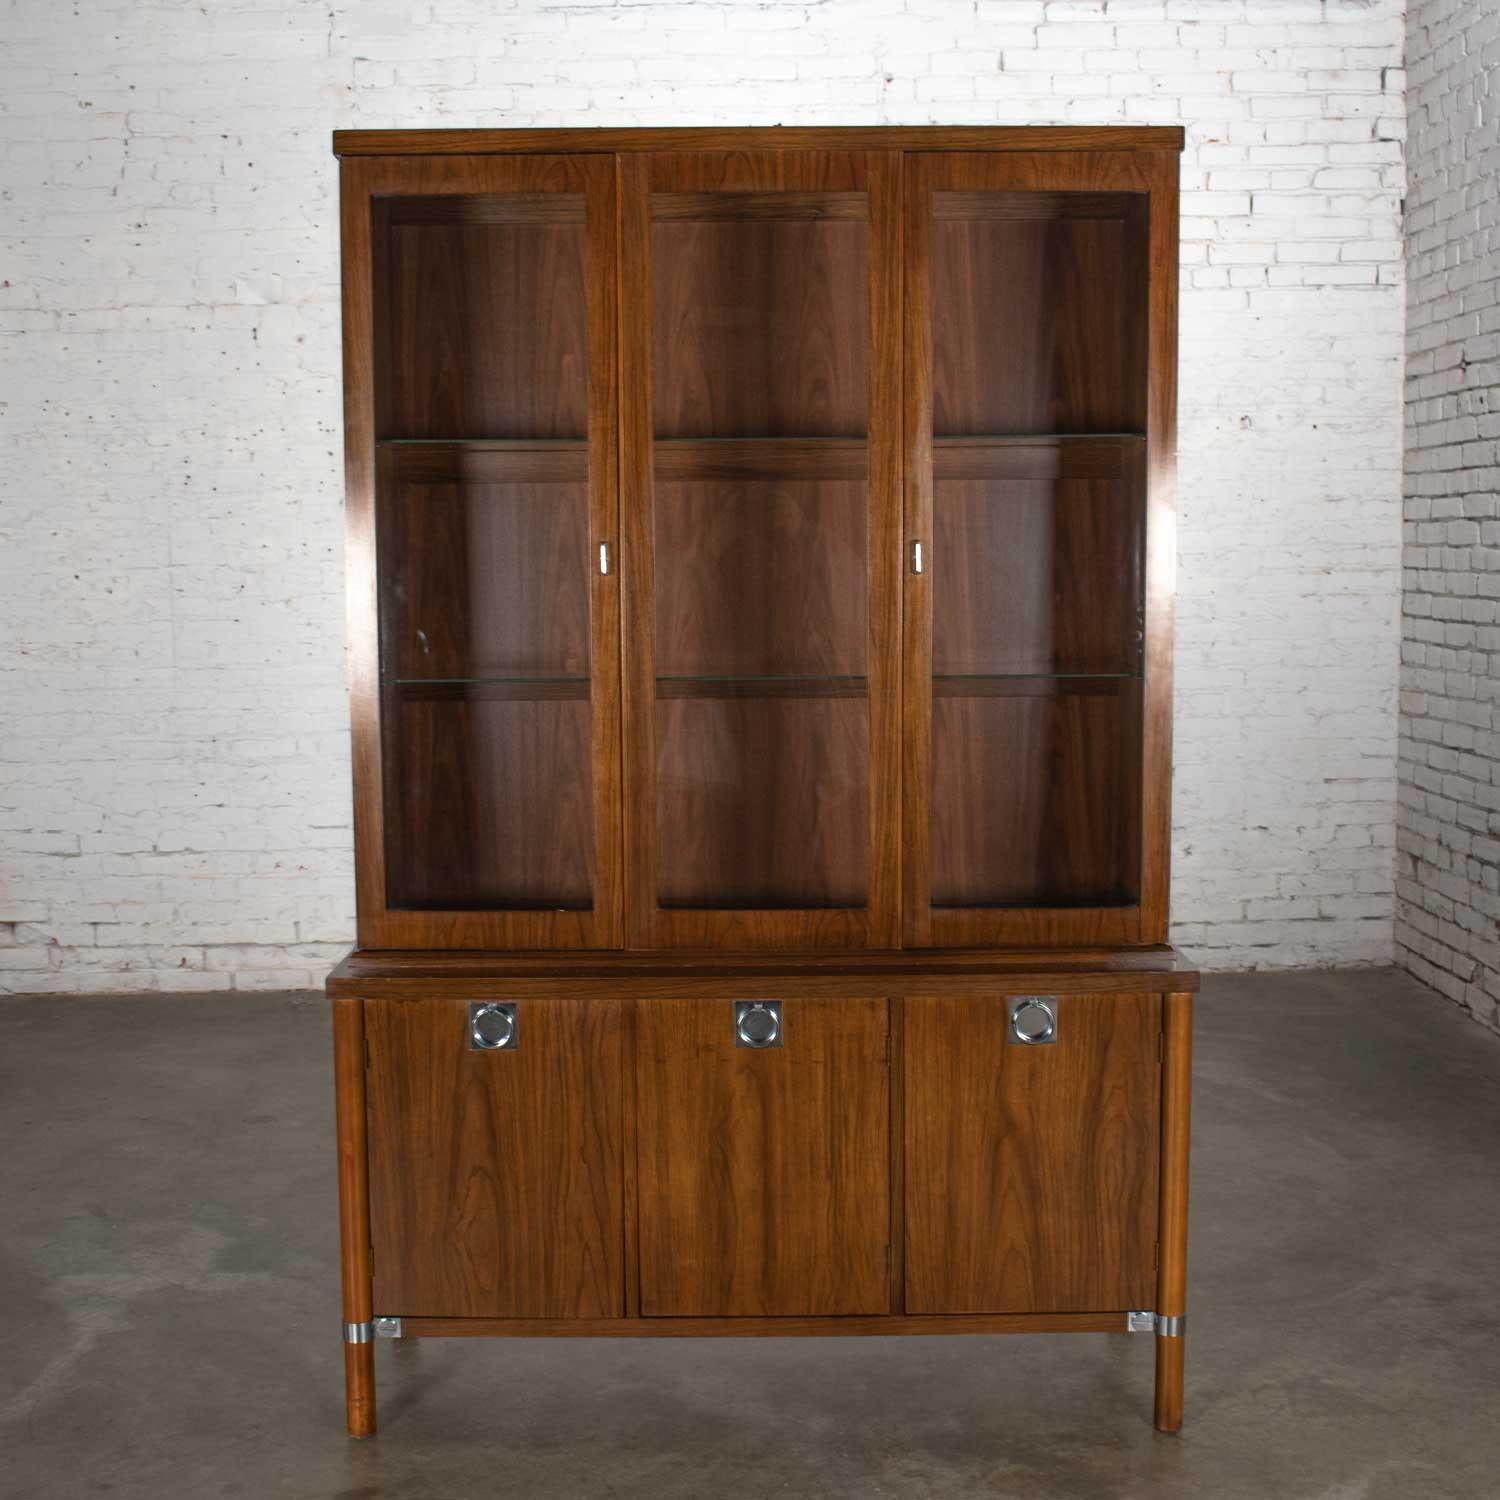 Gorgeous Mid-Century Modern walnut veneer china cabinet with chrome accents, glass shelves, and lights. Nice original vintage condition with wear as you would expect with age. One leg was chipped at the bottom and has been repaired and touched up.